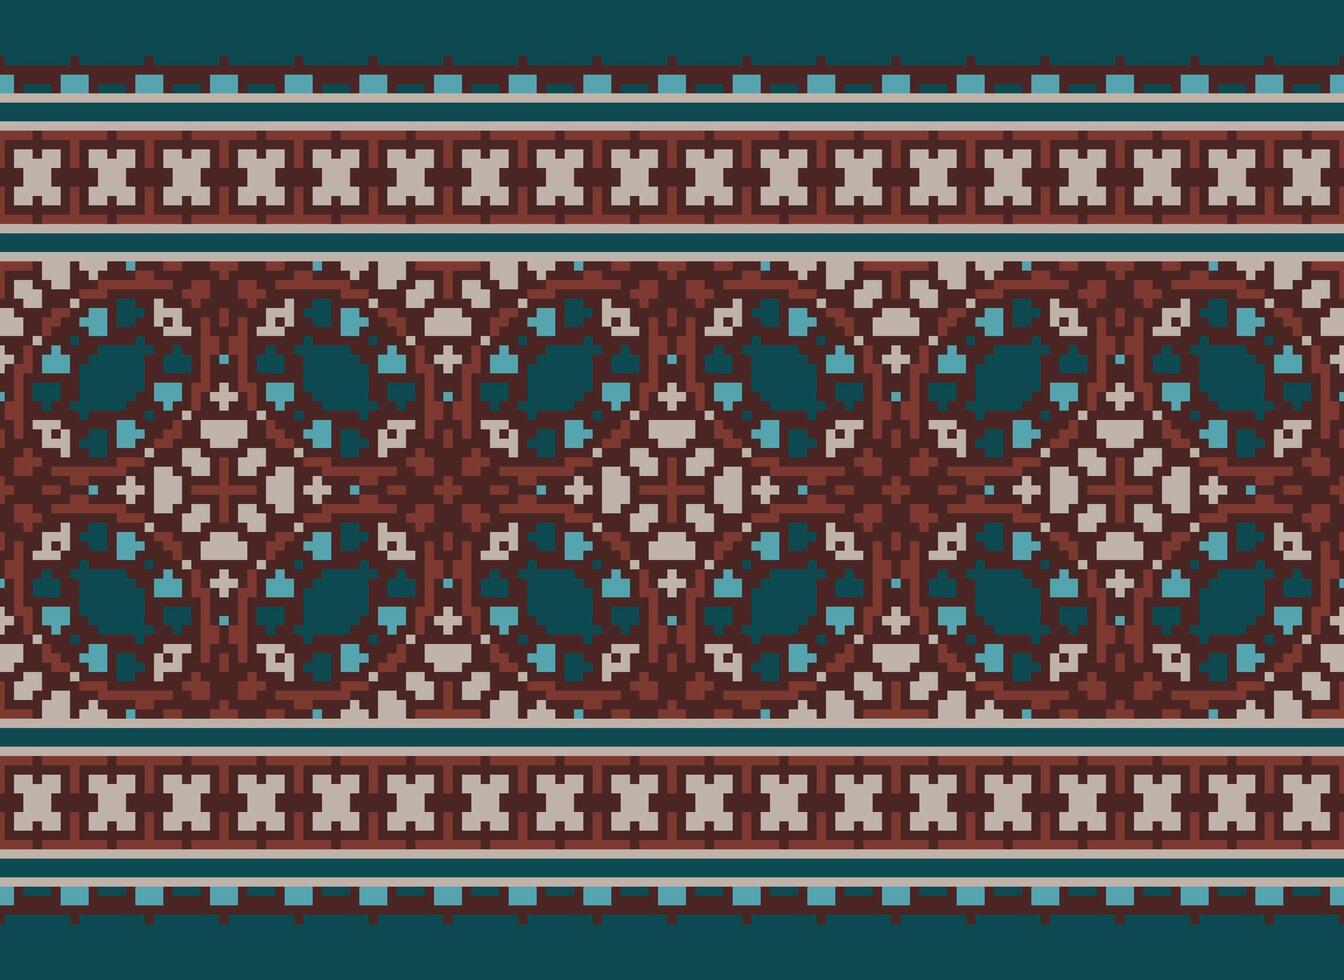 Pixel ikat and cross stitch geometric seamless pattern ethnic oriental traditional. Aztec style illustration design for carpet, wallpaper, clothing, wrapping, batik. vector